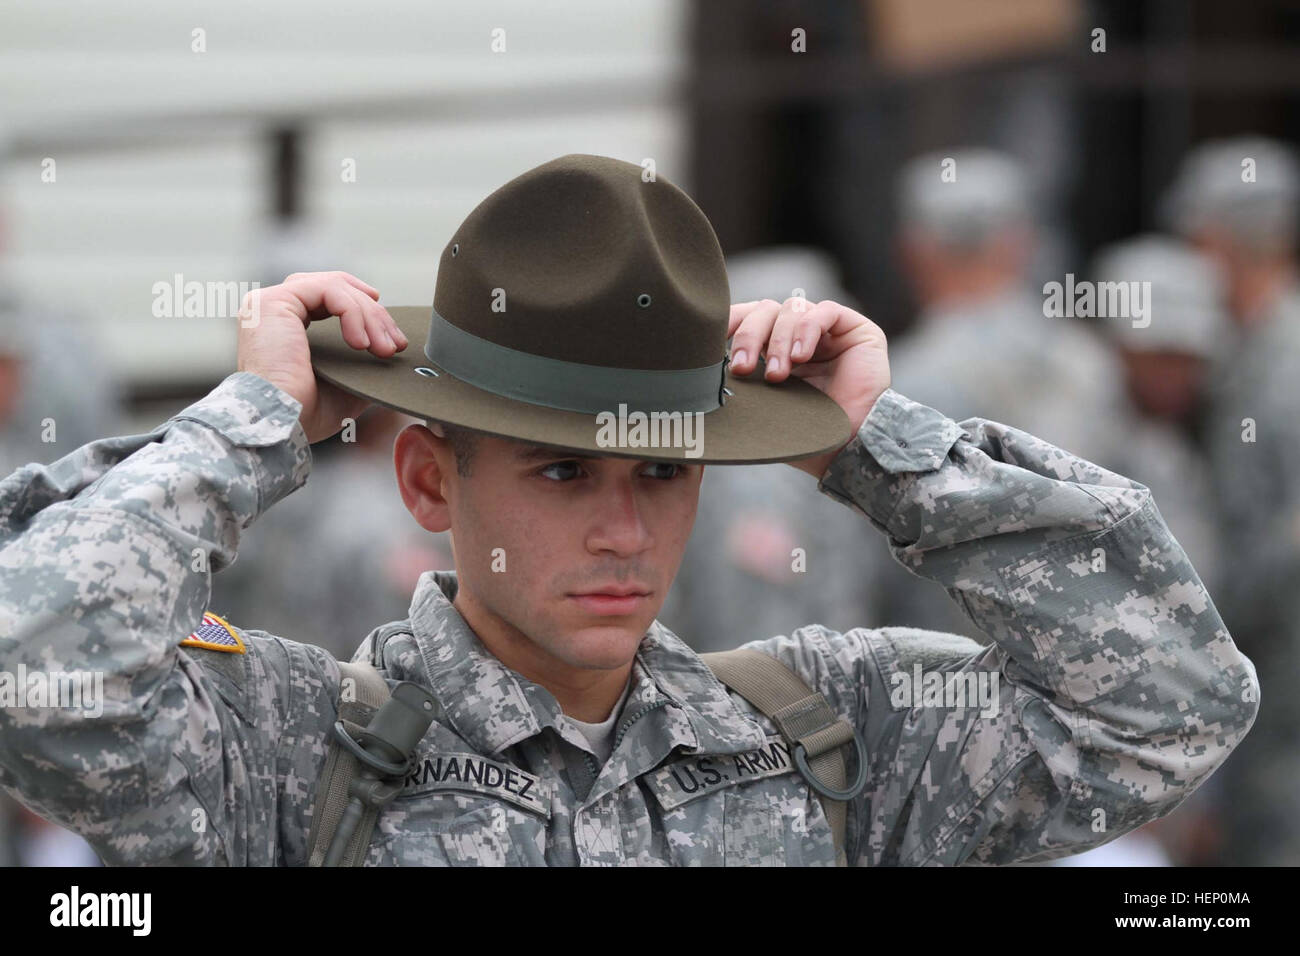 Drill sergeant candidates at the United States Army Drill Sergeant School are fitted and issued their hats just days before graduating from the prestigious course. The olive drab headgear worn by male drill sergeants today has a flat brim, Montana Peak and bears a gold disc of the Great Seal of the United States on its front. Infantry Soldiers wear an infantry blue disc under the seal. Drill sergeants first wore this hat in 1964 as a way of distinguishing themselves from those whom they were charged with transforming into Soldiers. It has been their proud symbol ever since. A legendary symbol  Stock Photo